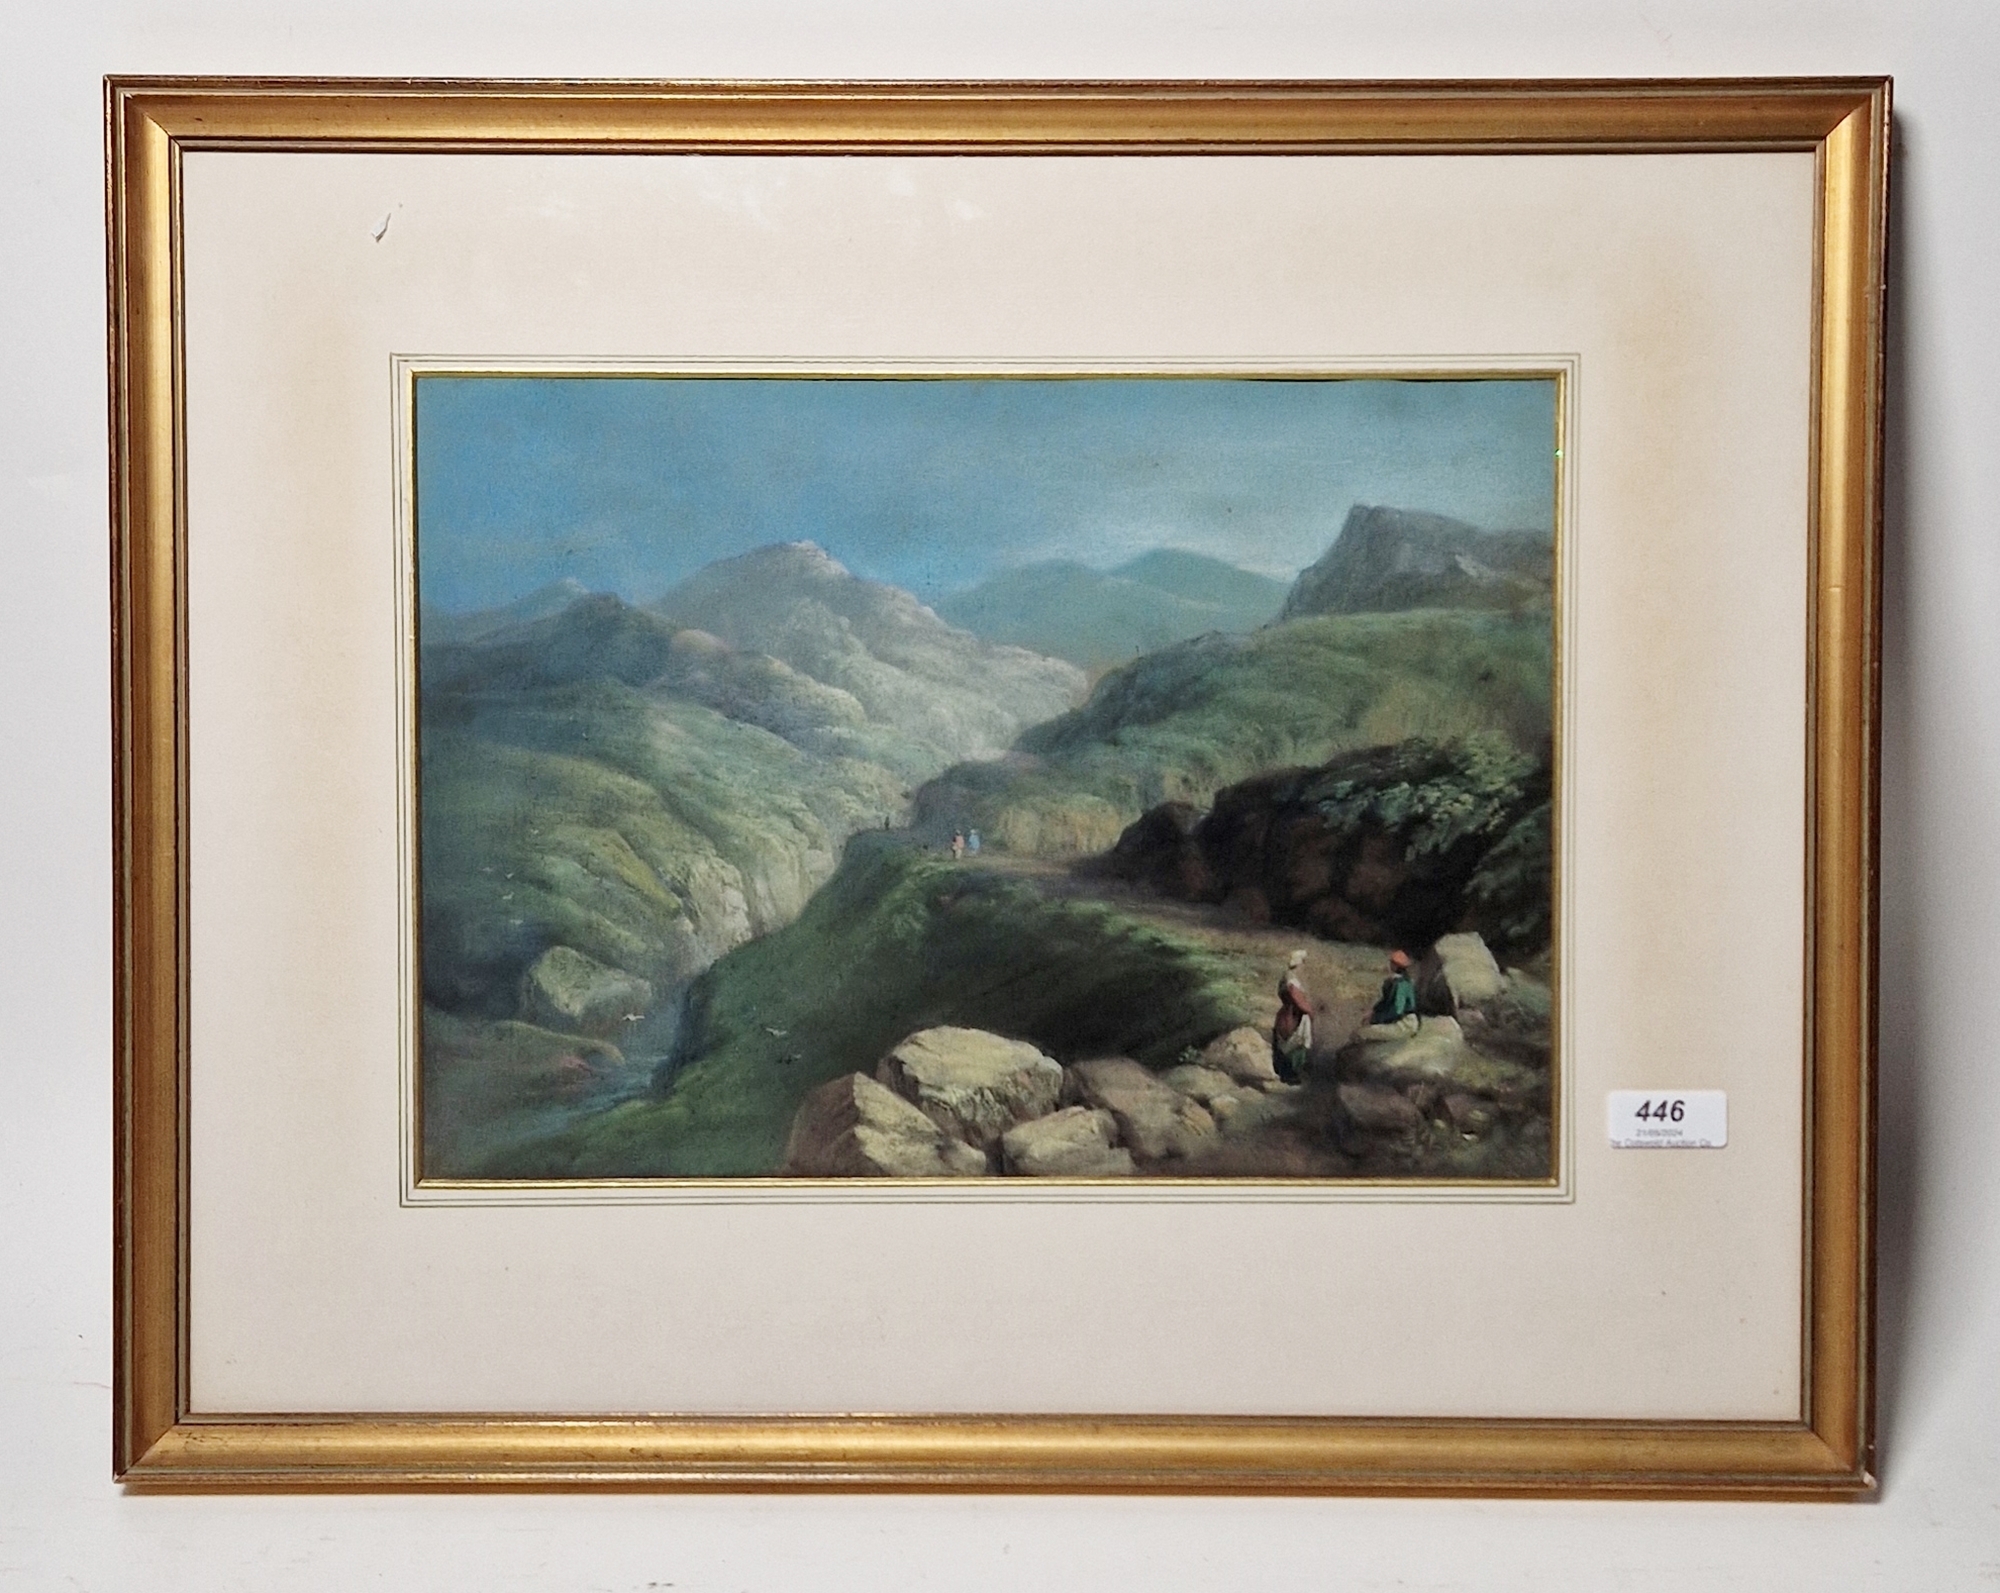 19th century continental school Pastel on paper Mountain scape with figures on a path, - Image 4 of 4